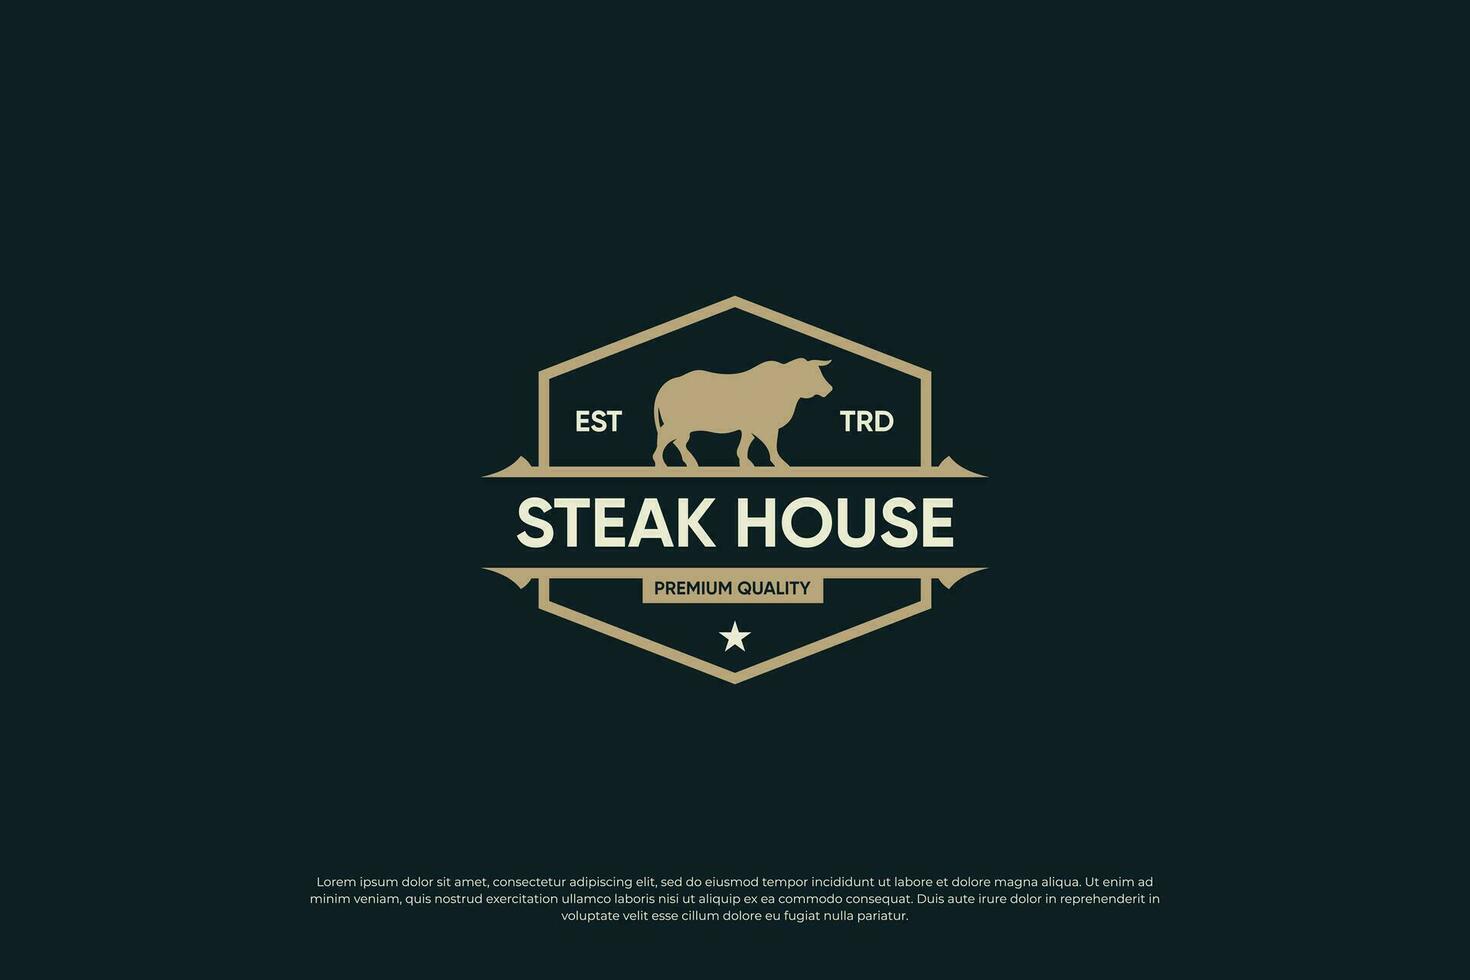 Vintage steak house logo set, barbecue grill badges, labels. Retro typography style. vector